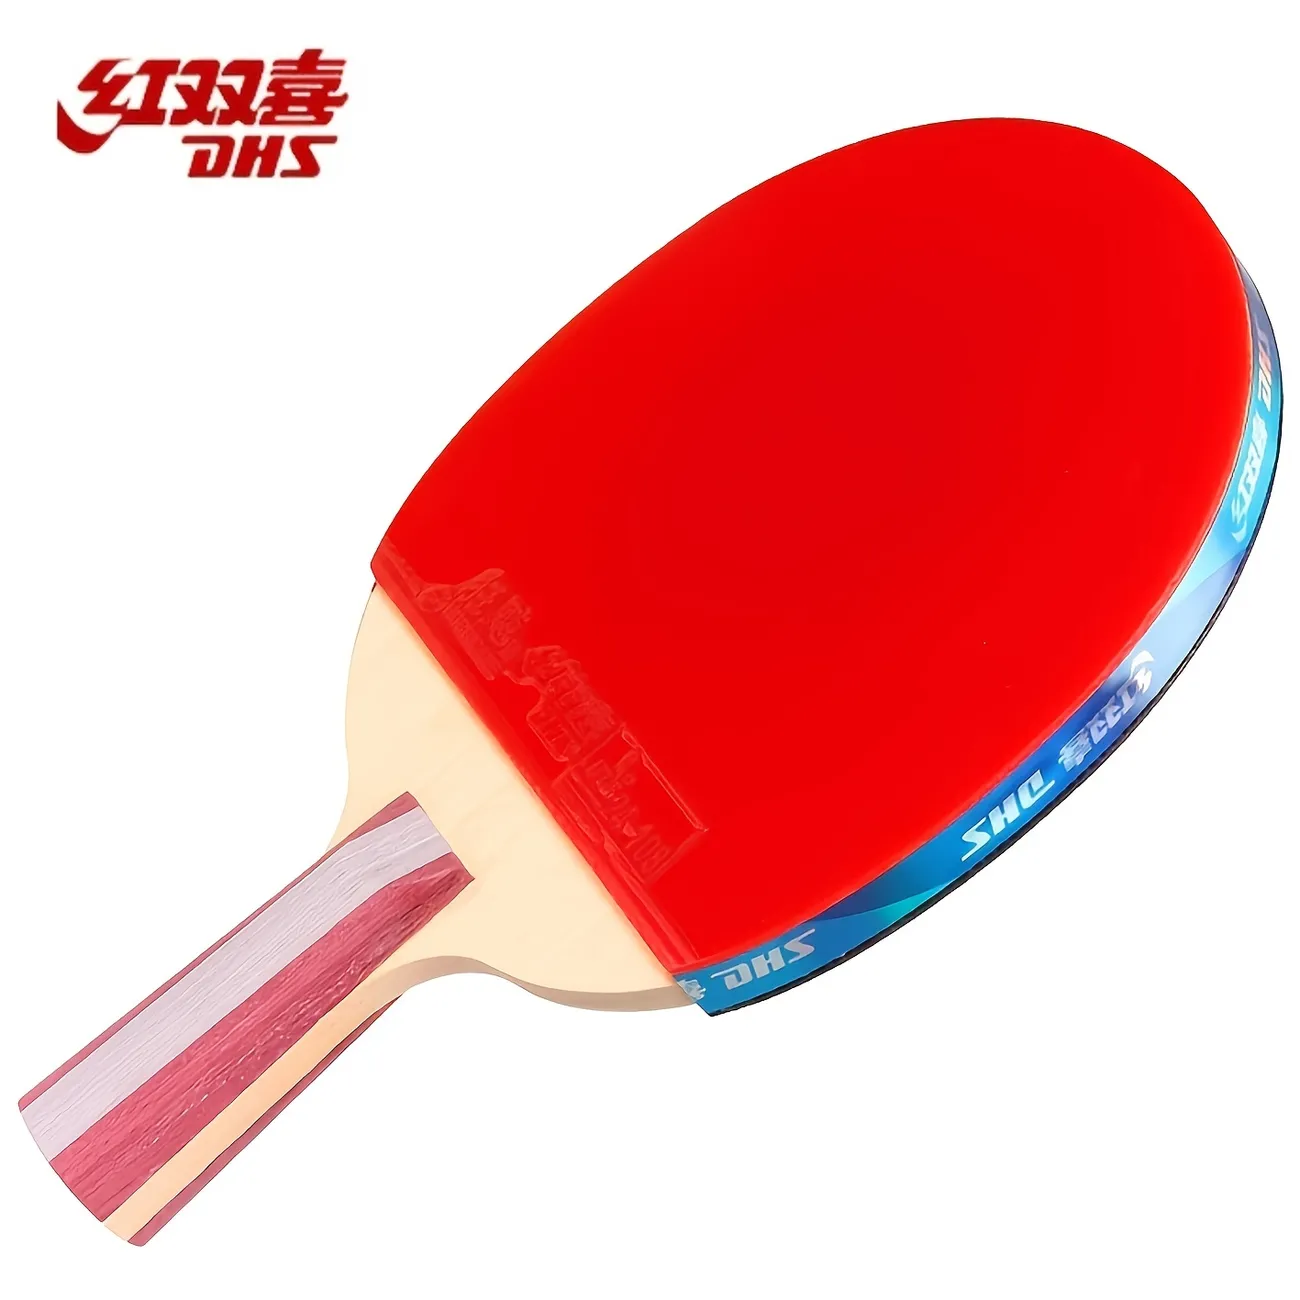 Dhs Ping Pong Racquet, 5 Stars Double Sided Reverse Rubber Table Tennis Racket For Competition Training H5006